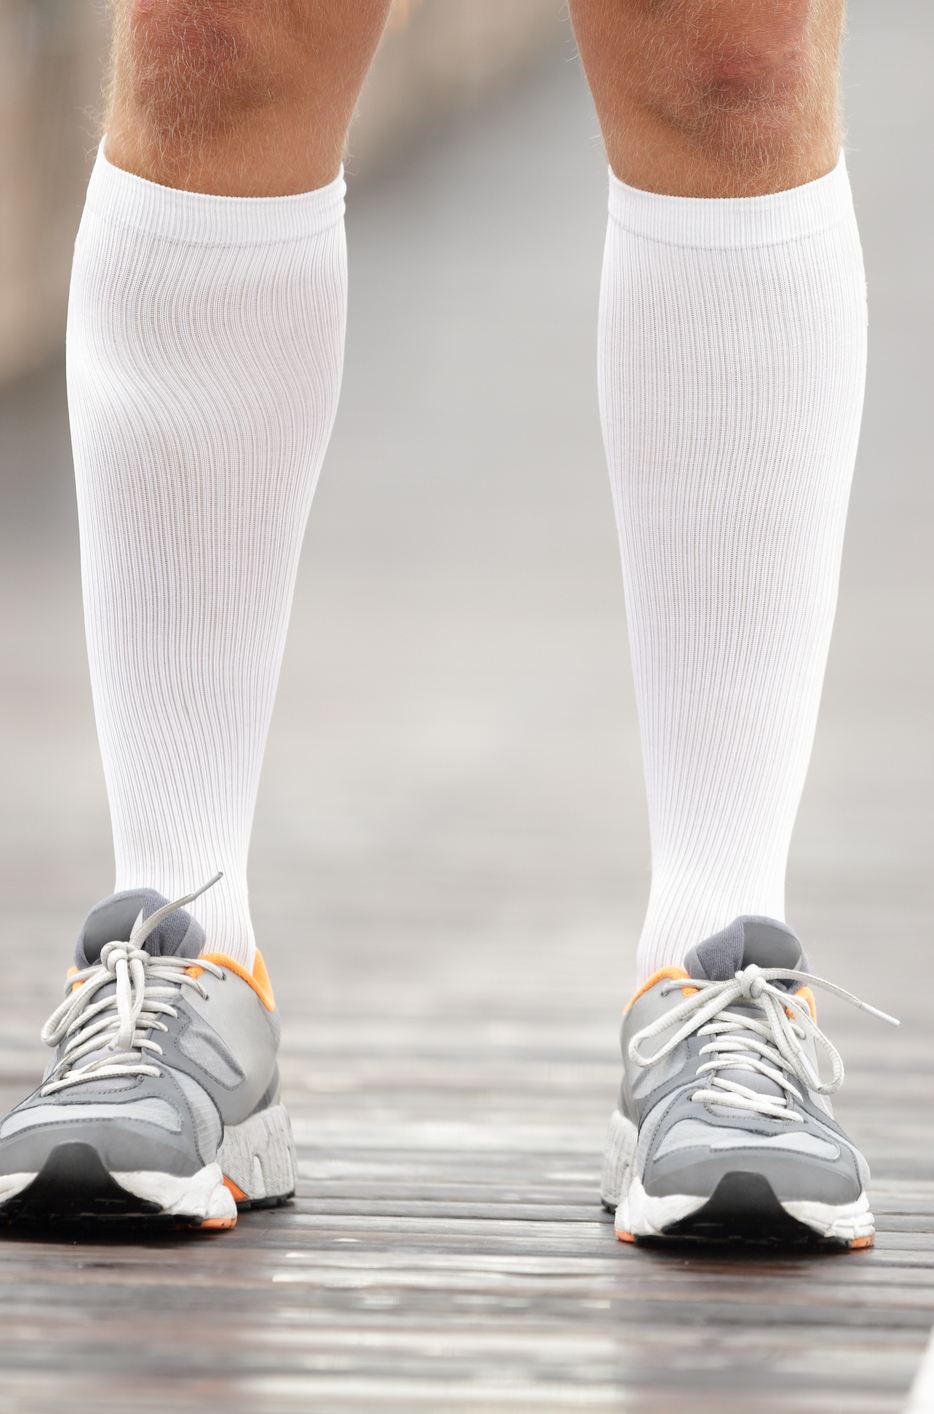 Compression Socks Can Help Prevent Varicose Veins